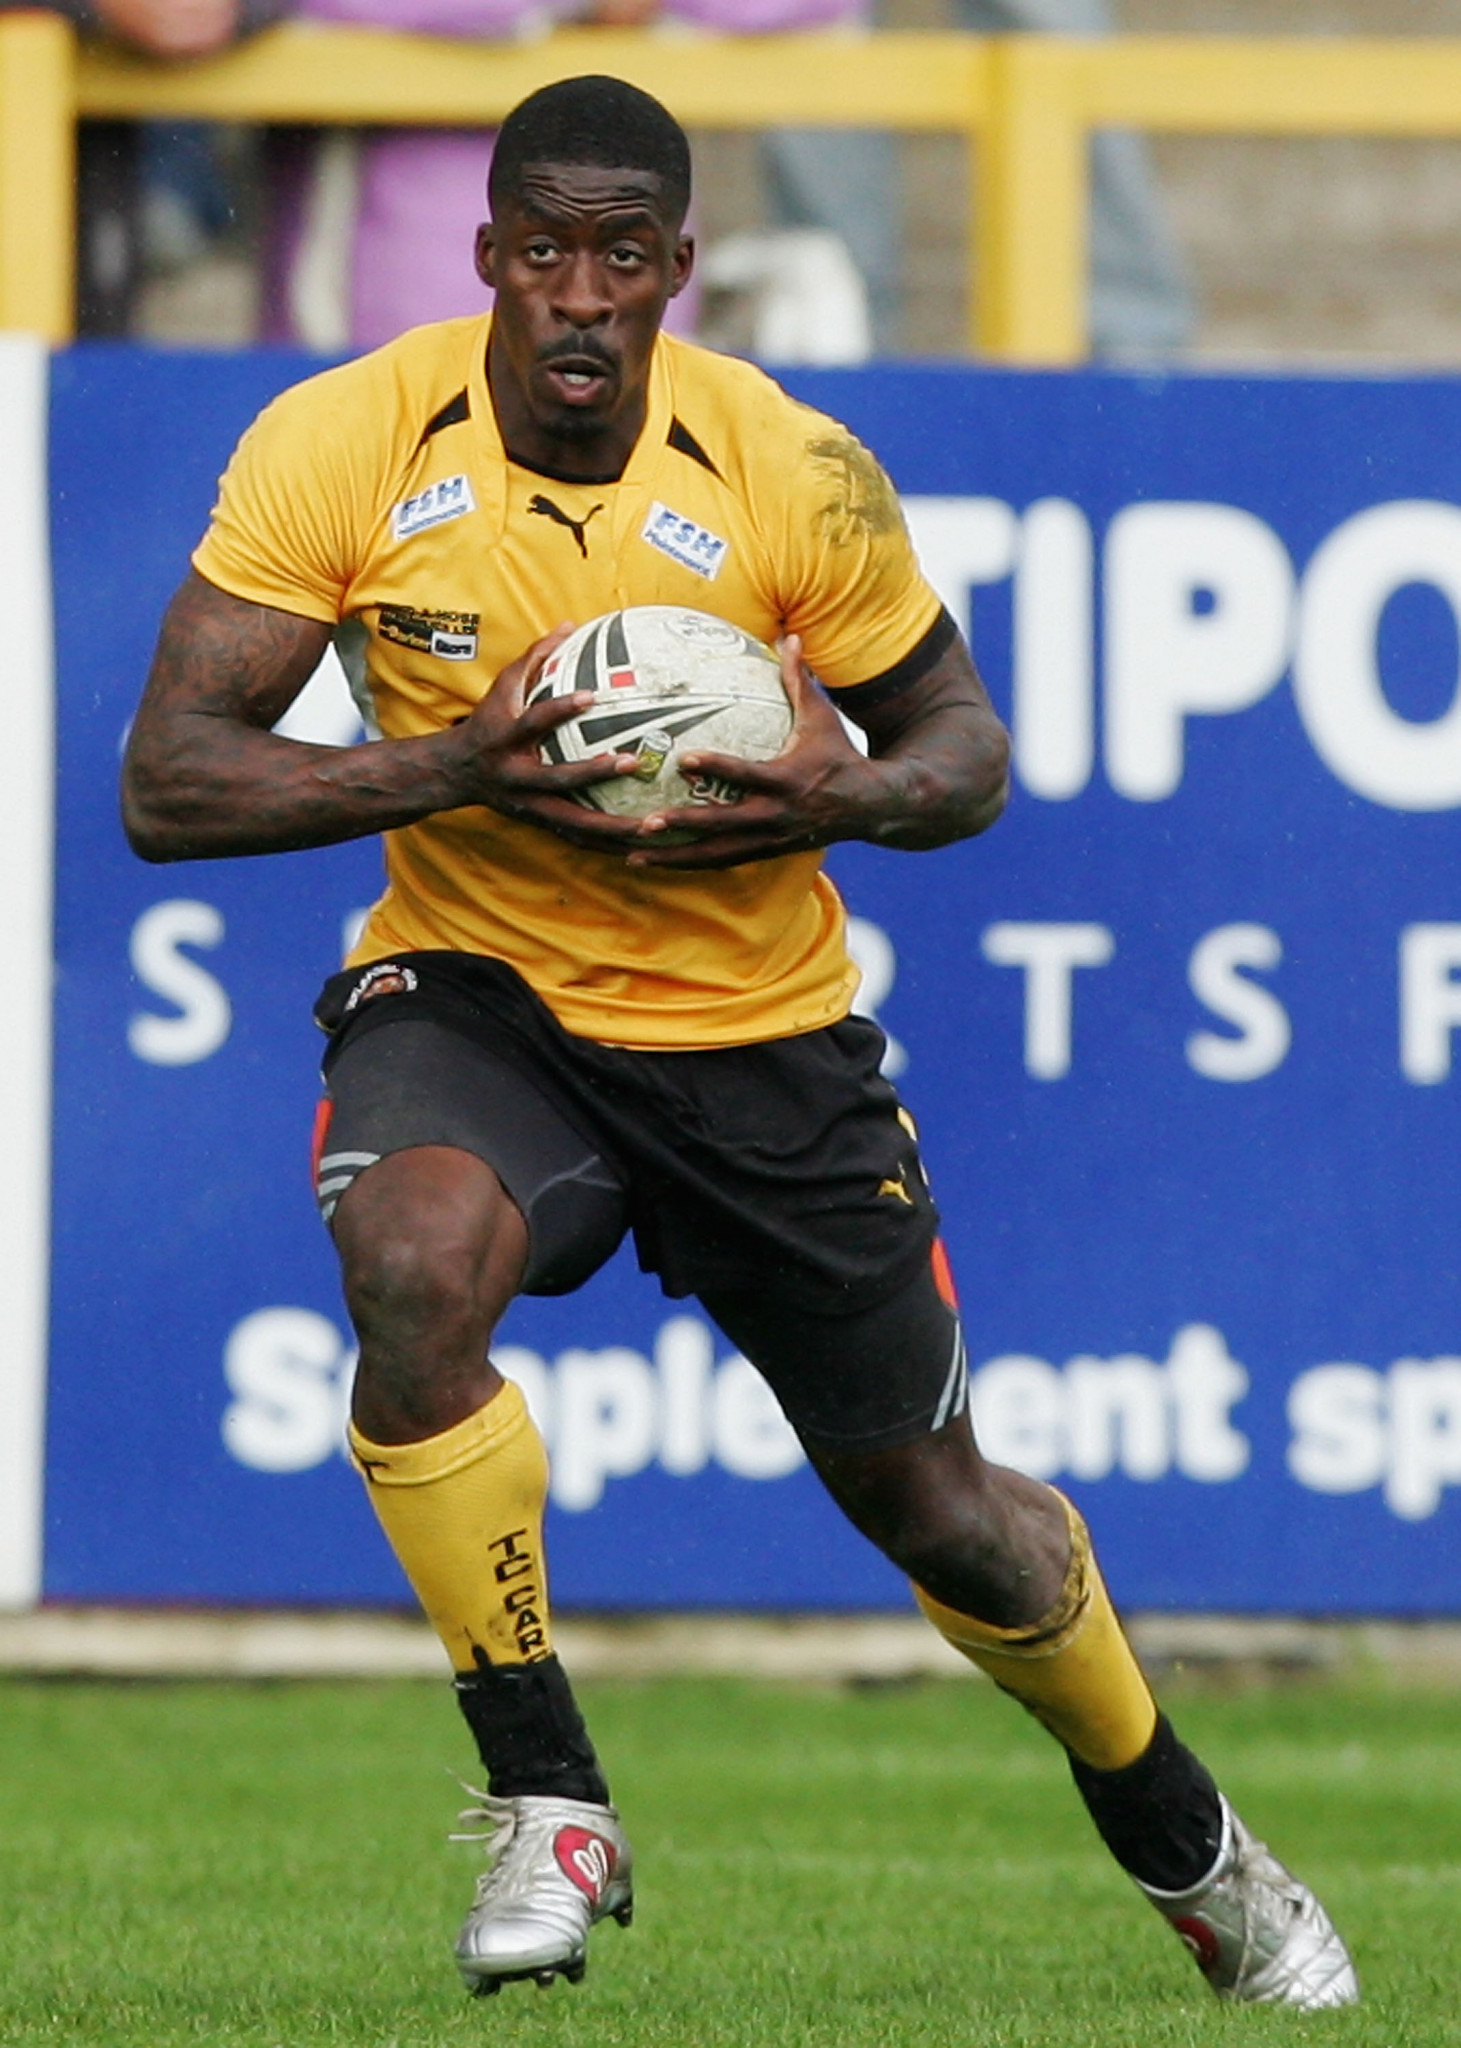 Dwain Chambers gave rugby league a try with Castleford Tigers ©Getty Images